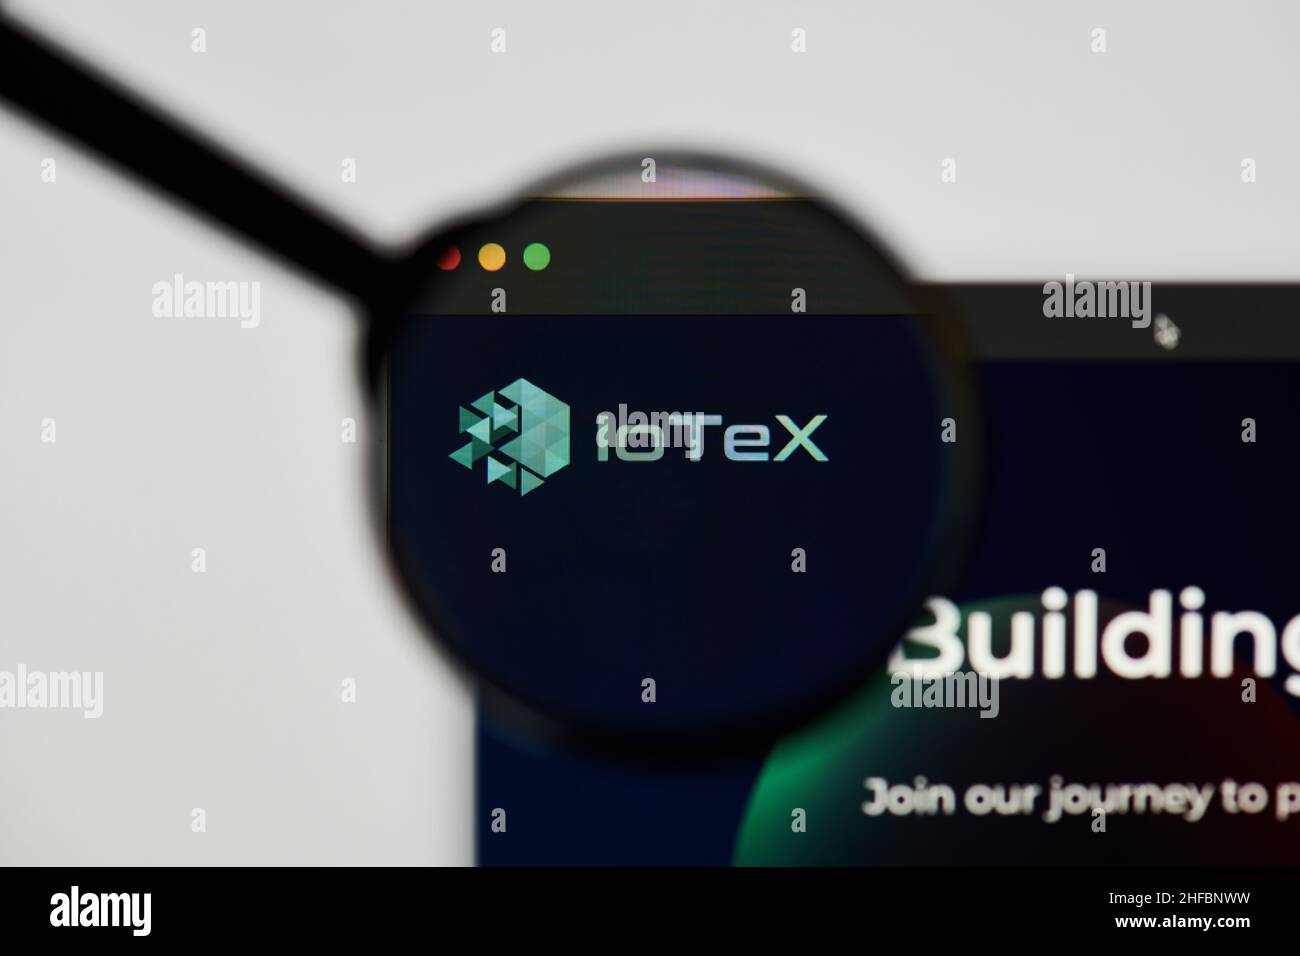 Milan, Italy - January 11, 2022: iotex - IOTX website's hp.  iotex, IOTX coin logo visible through a loope. Defi, ntf, cryptocurrency concepts illustr Stock Photo